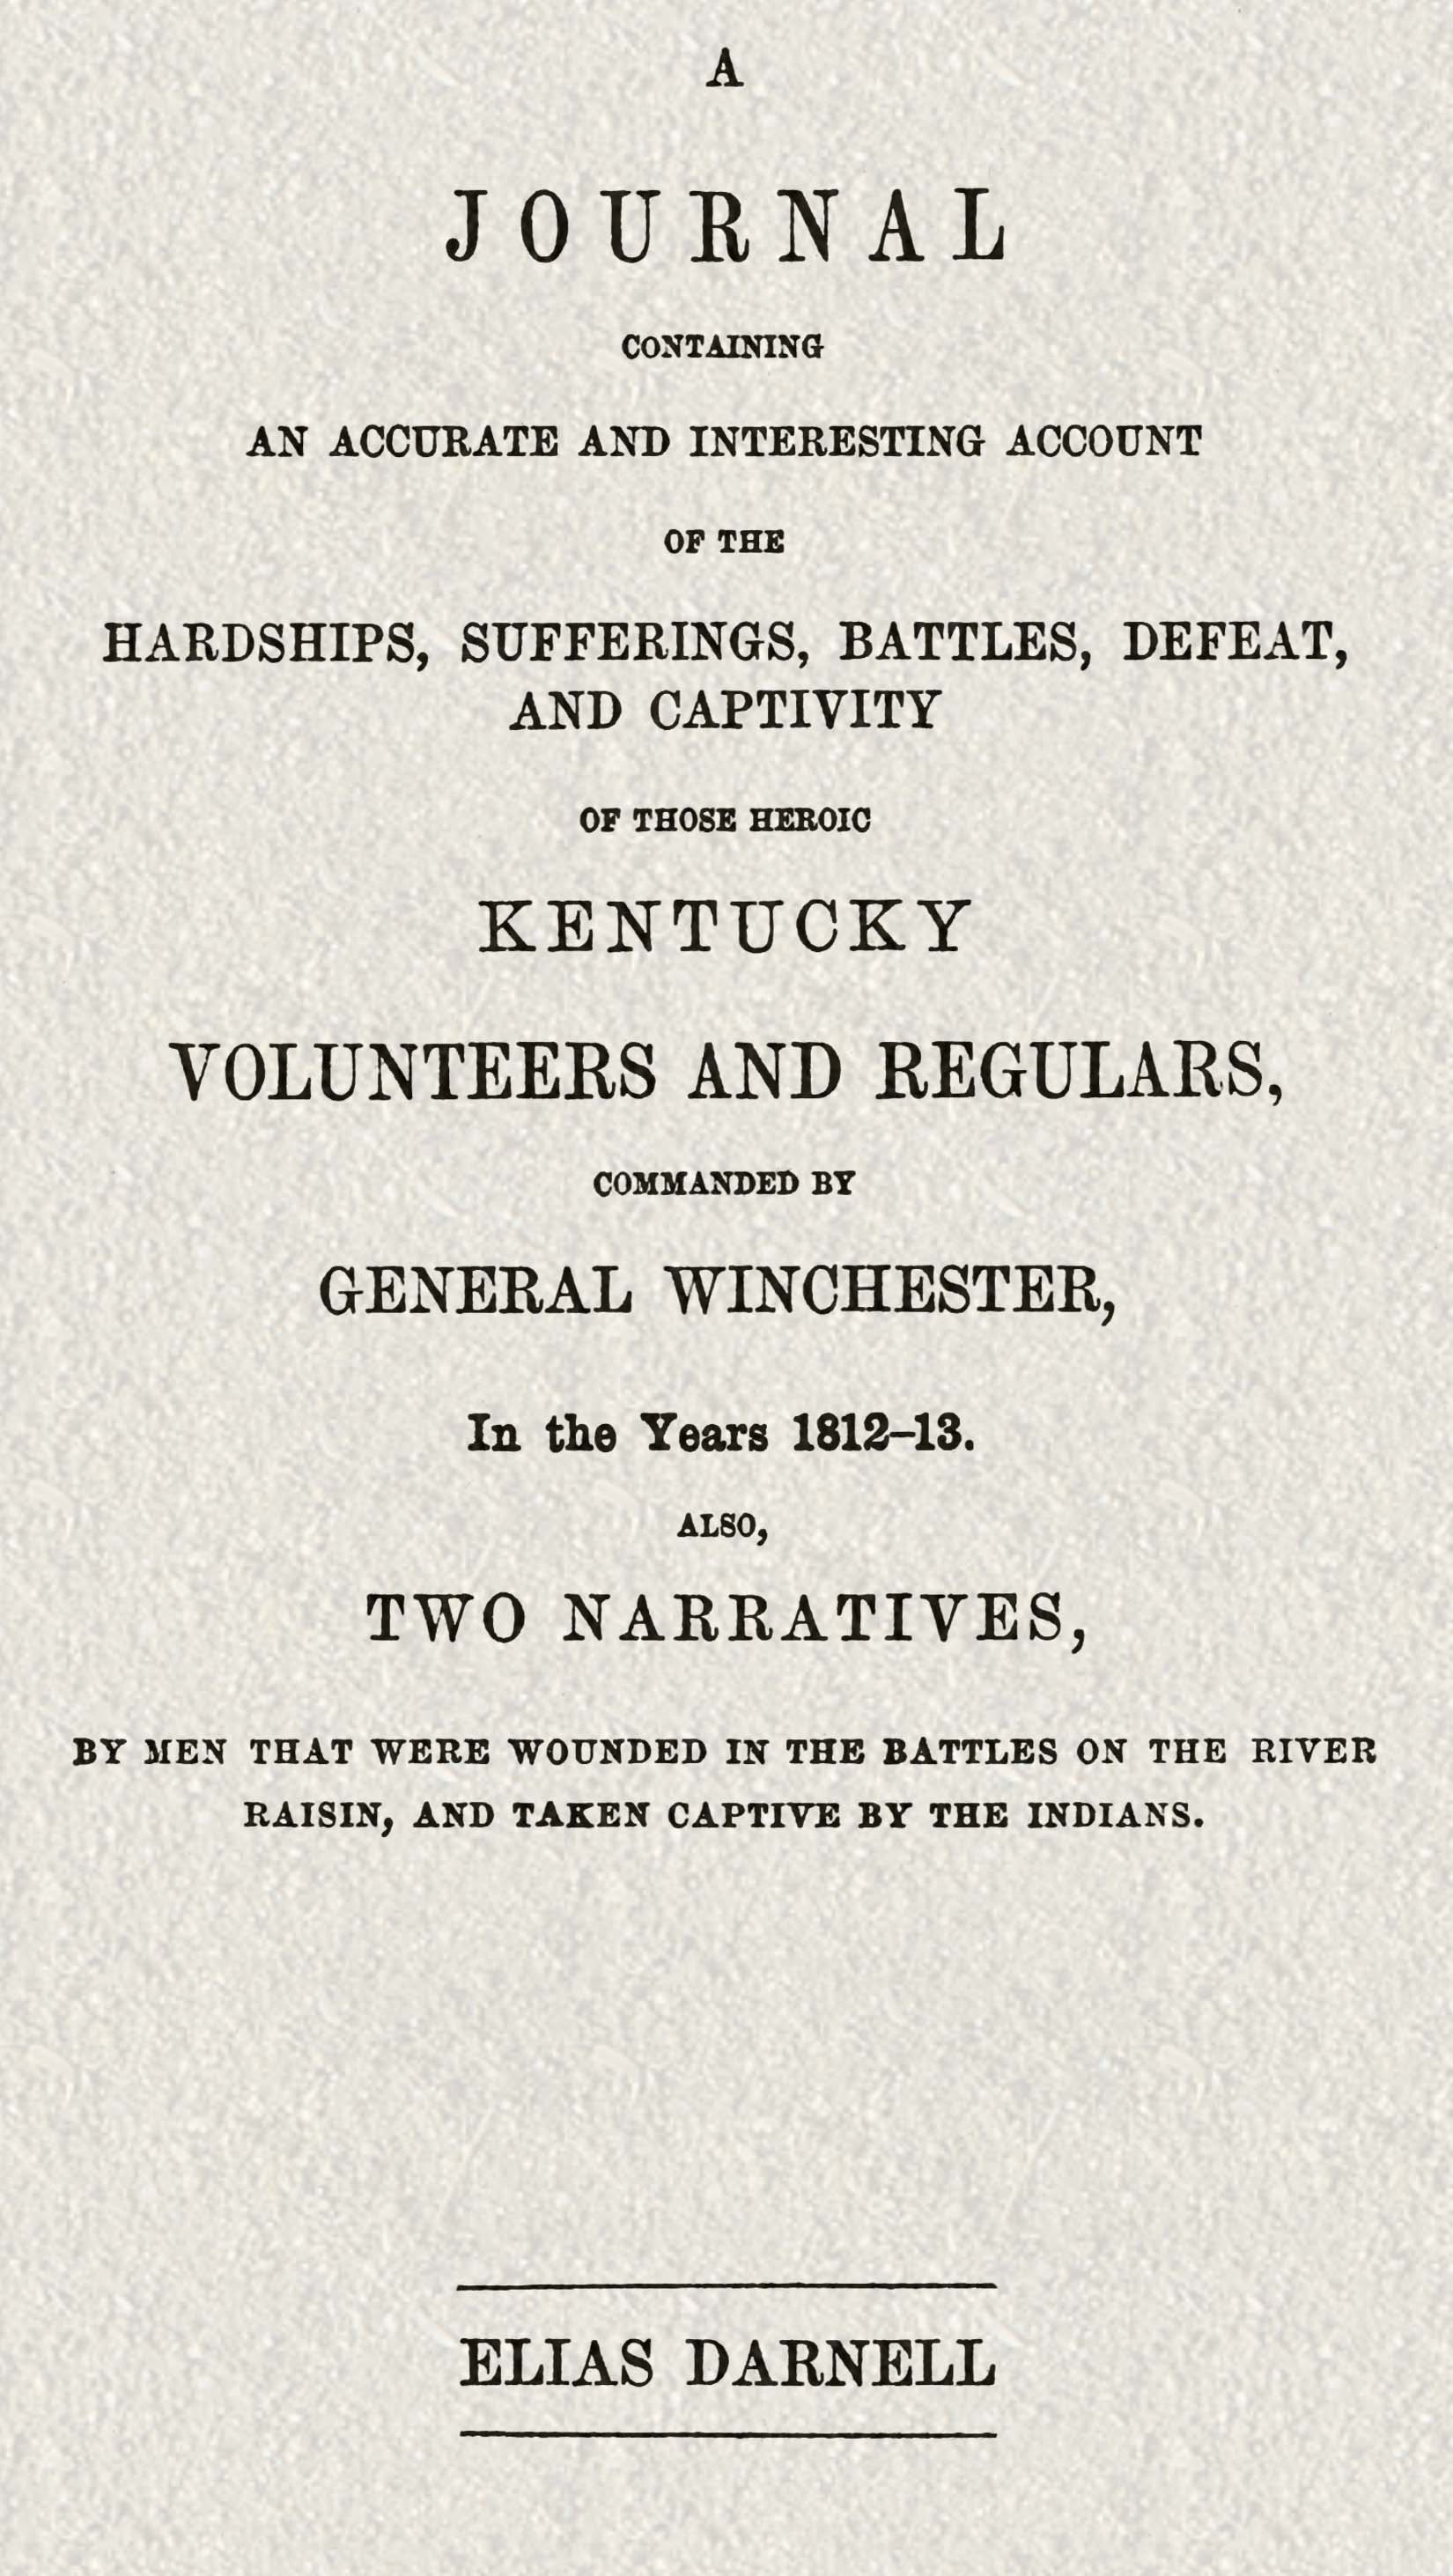 A journal containing an accurate and interesting account of the hardships, sufferings, battles, defeat, and captivity of those heroic Kentucky volunteers and regulars, commanded by General Winchester, in the year 1812-13&#10;Also, two narratives, by men that were wounded in the battles on the River Raisin, and taken captive by the Indians